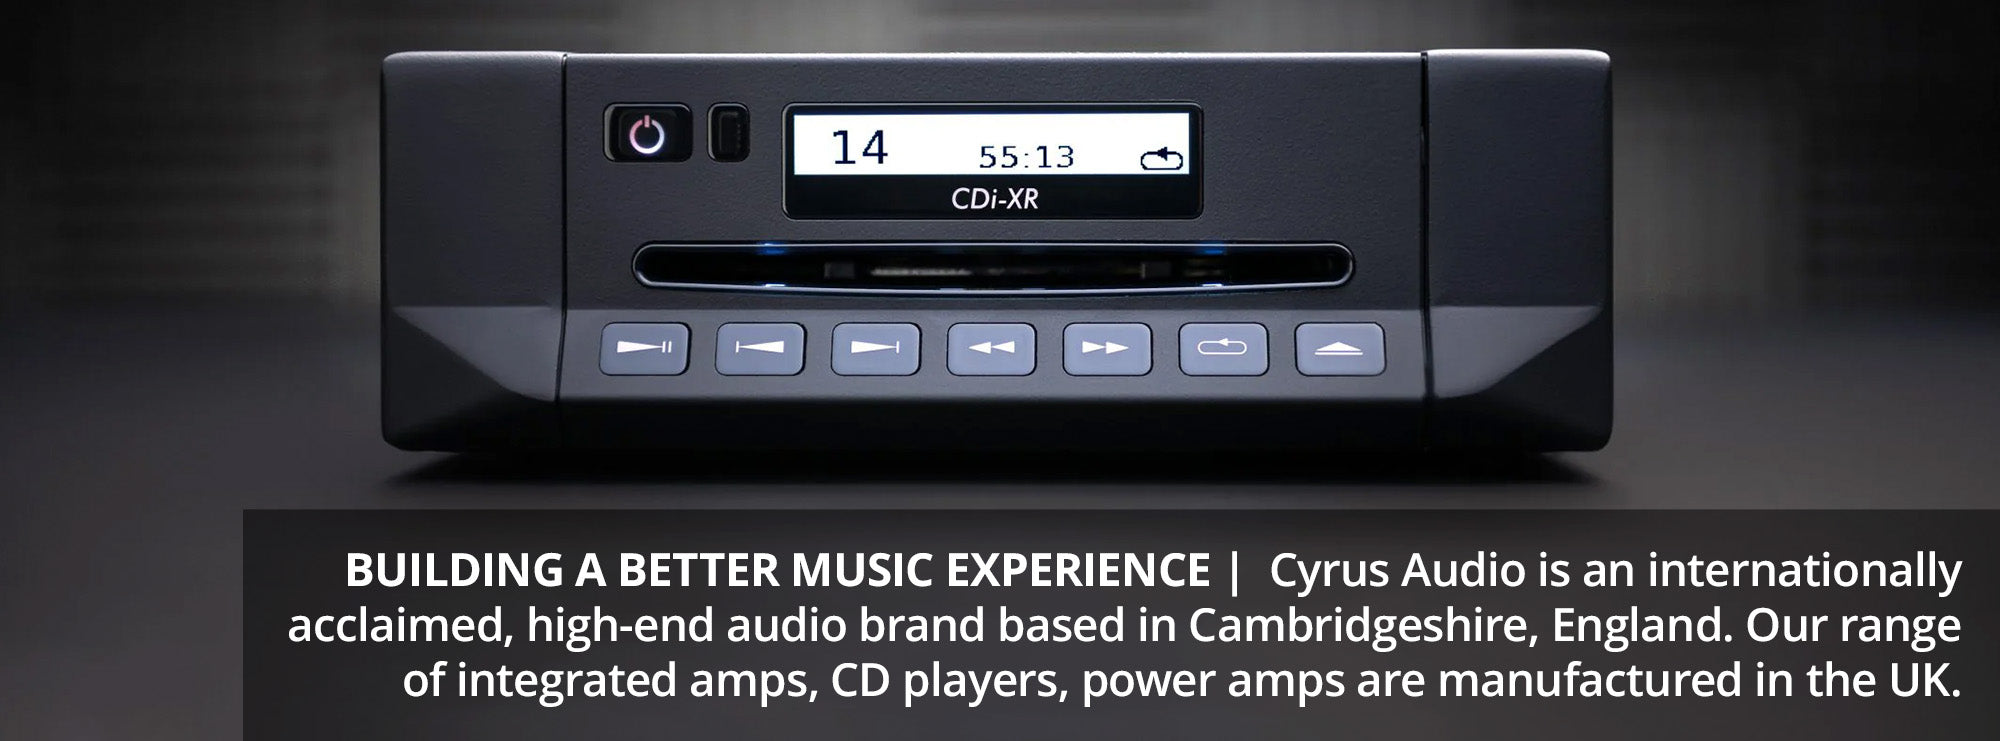 Building a Better Music Experience |  Cyrus Audio is an internationally acclaimed, high-end audio brand based in Cambridgeshire, England. Our range of integrated amps, CD players, power amps are manufactured in the UK.